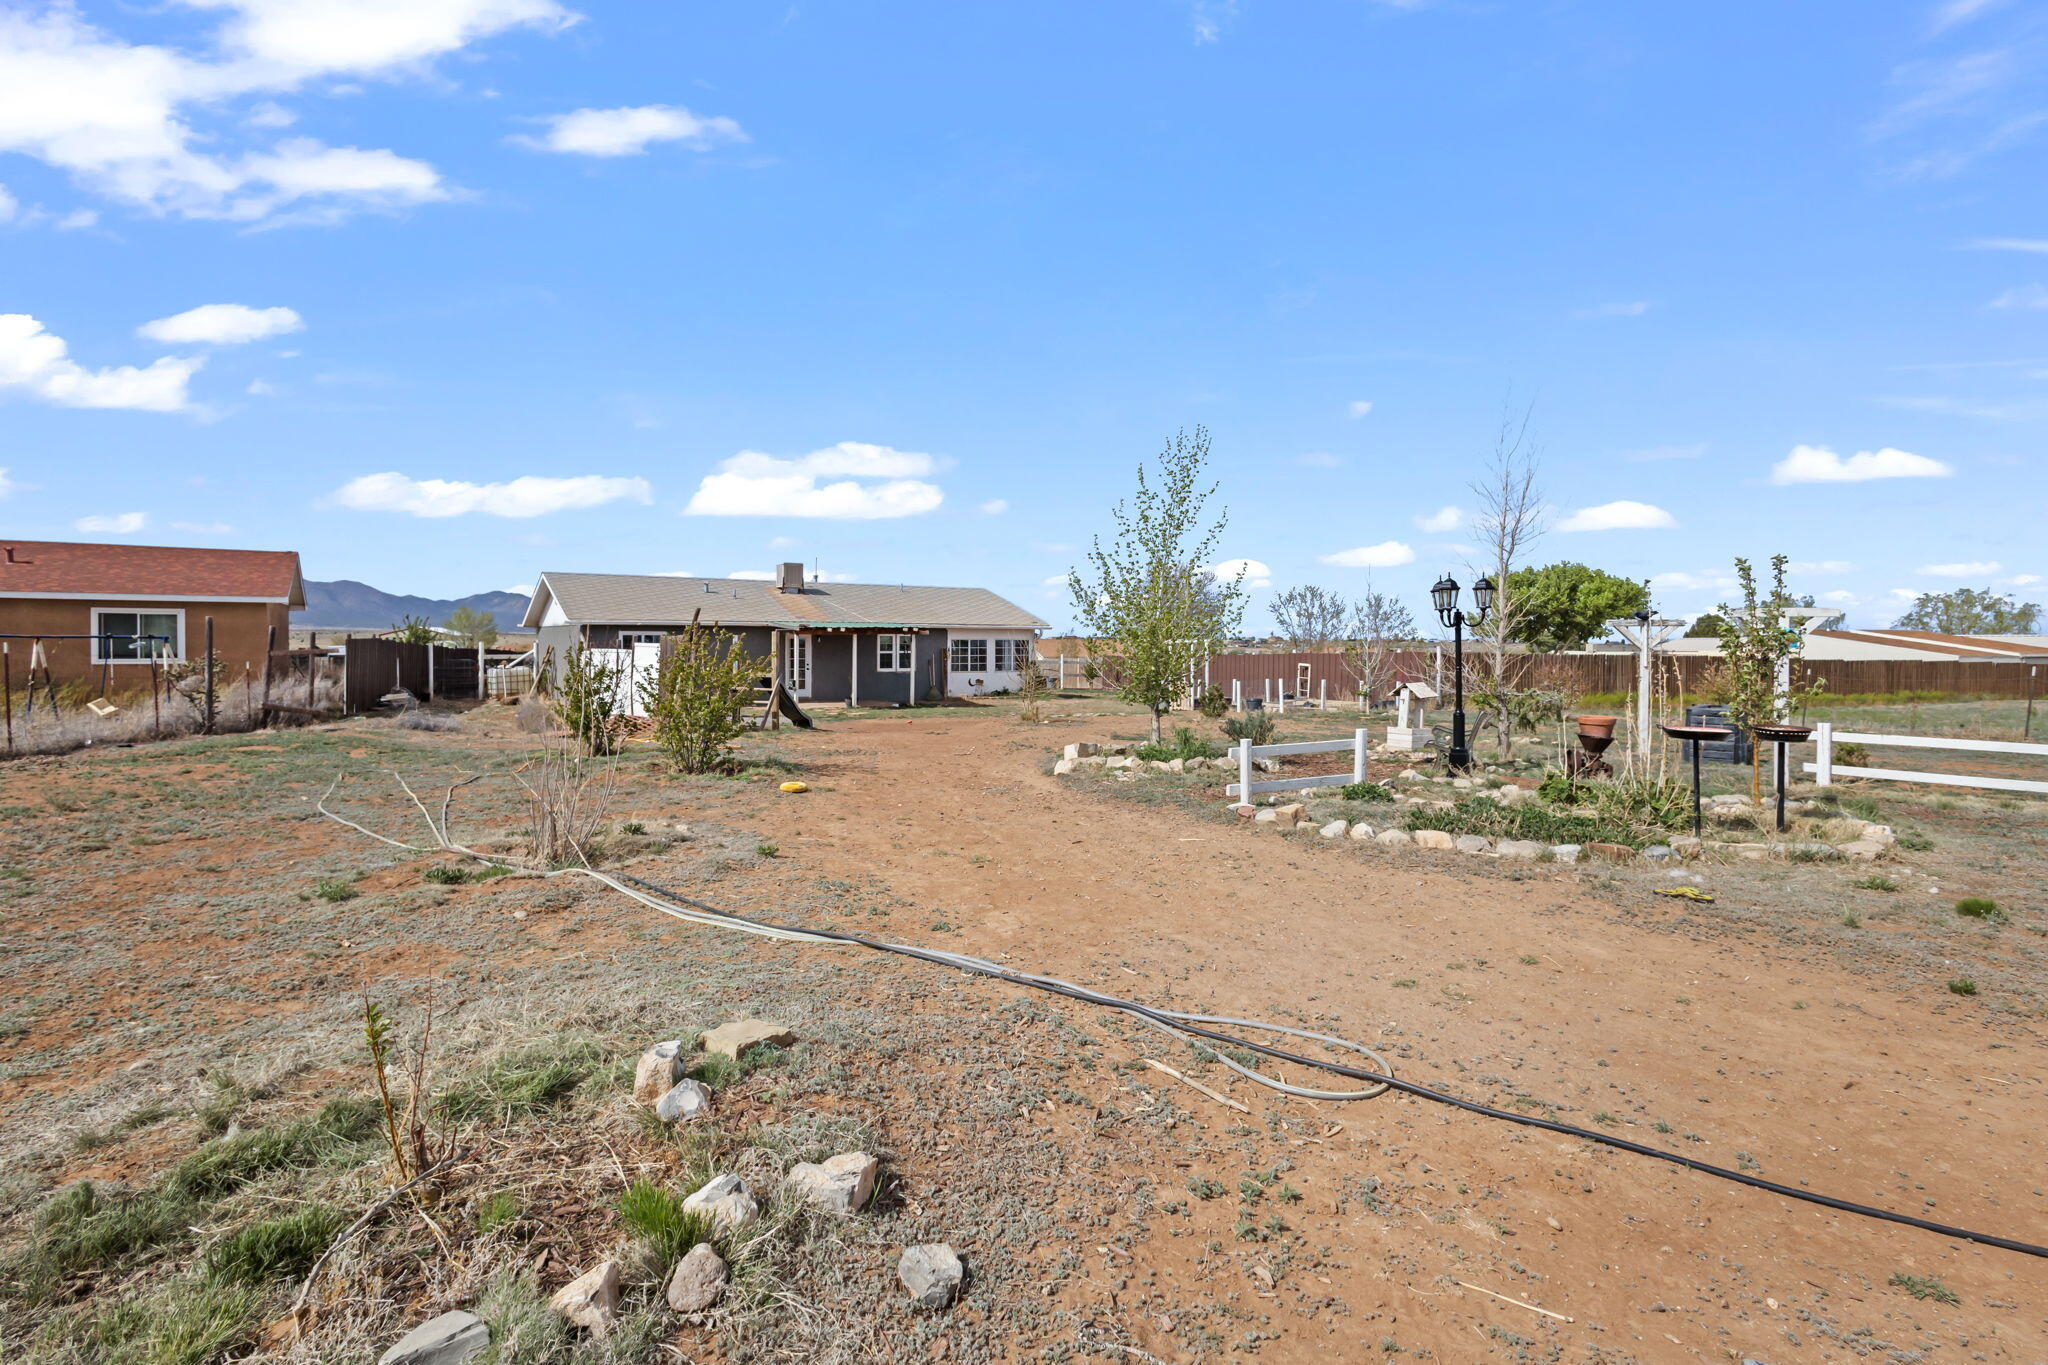 31 Roberts Drive, Edgewood, New Mexico 87015, 2 Bedrooms Bedrooms, ,1 BathroomBathrooms,Residential,For Sale,31 Roberts Drive,1061527